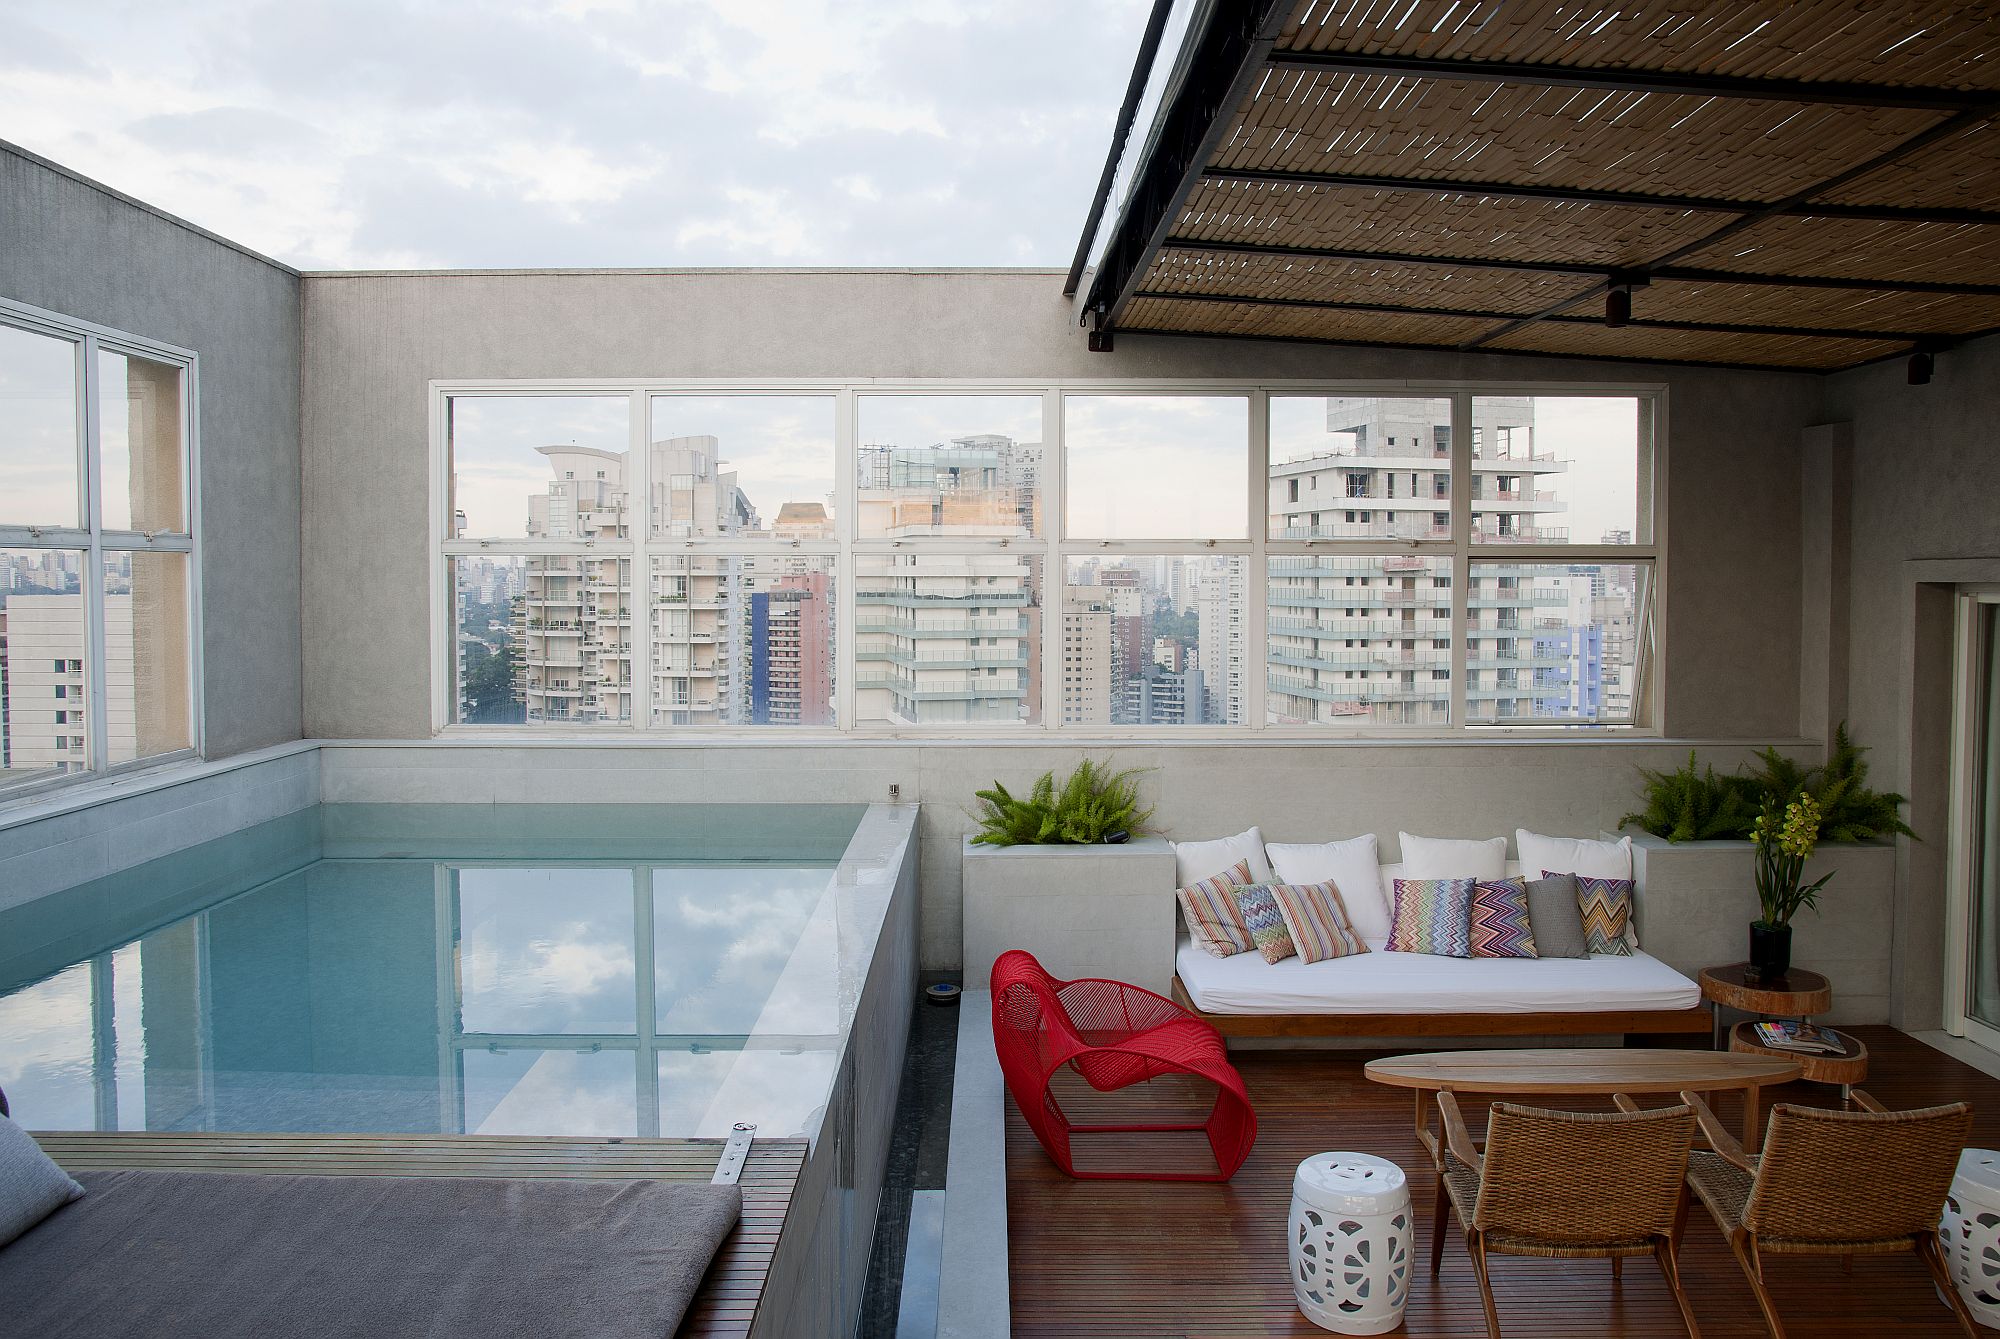 Infinity-pool-and-deck-area-of-the-penthouse-with-view-of-the-cityscape